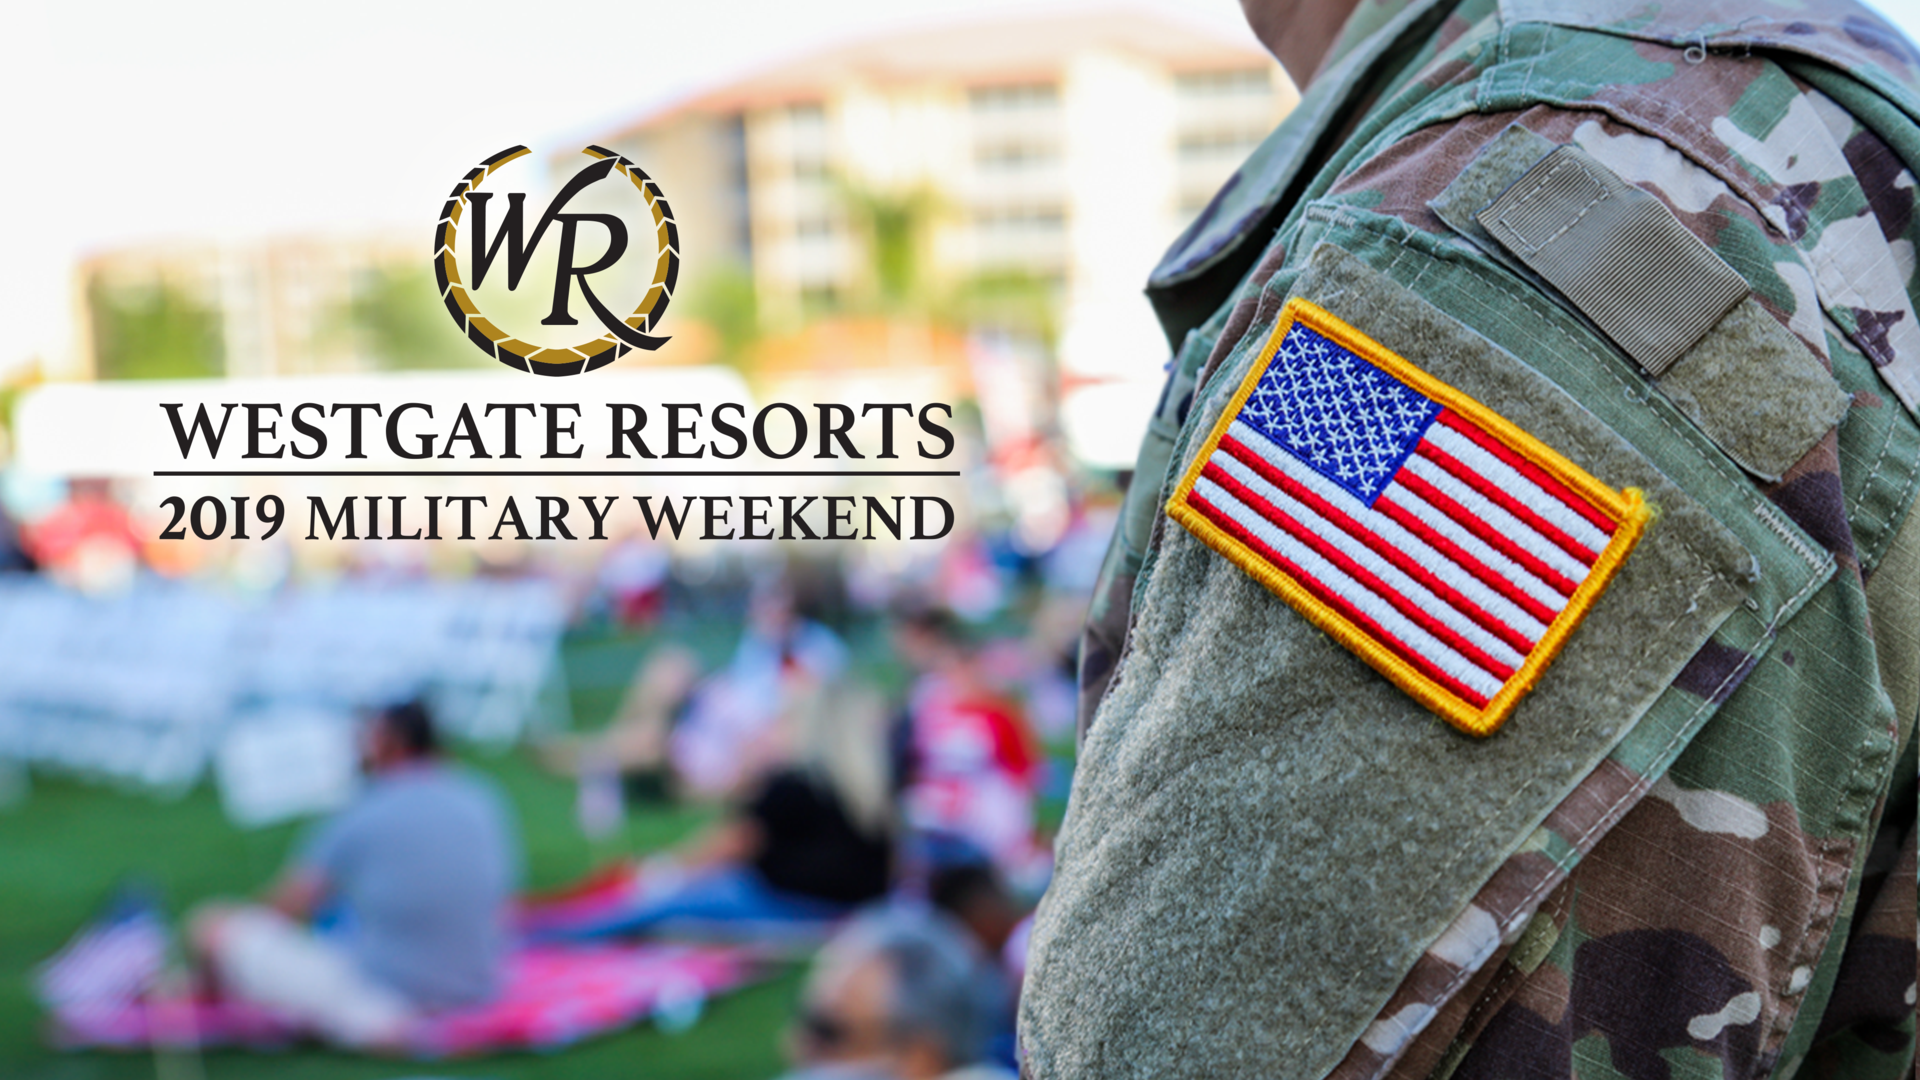 Gary Sinise & The Lt. Dan Band to headline concert during Westgate Resorts 2019 Military Weekend